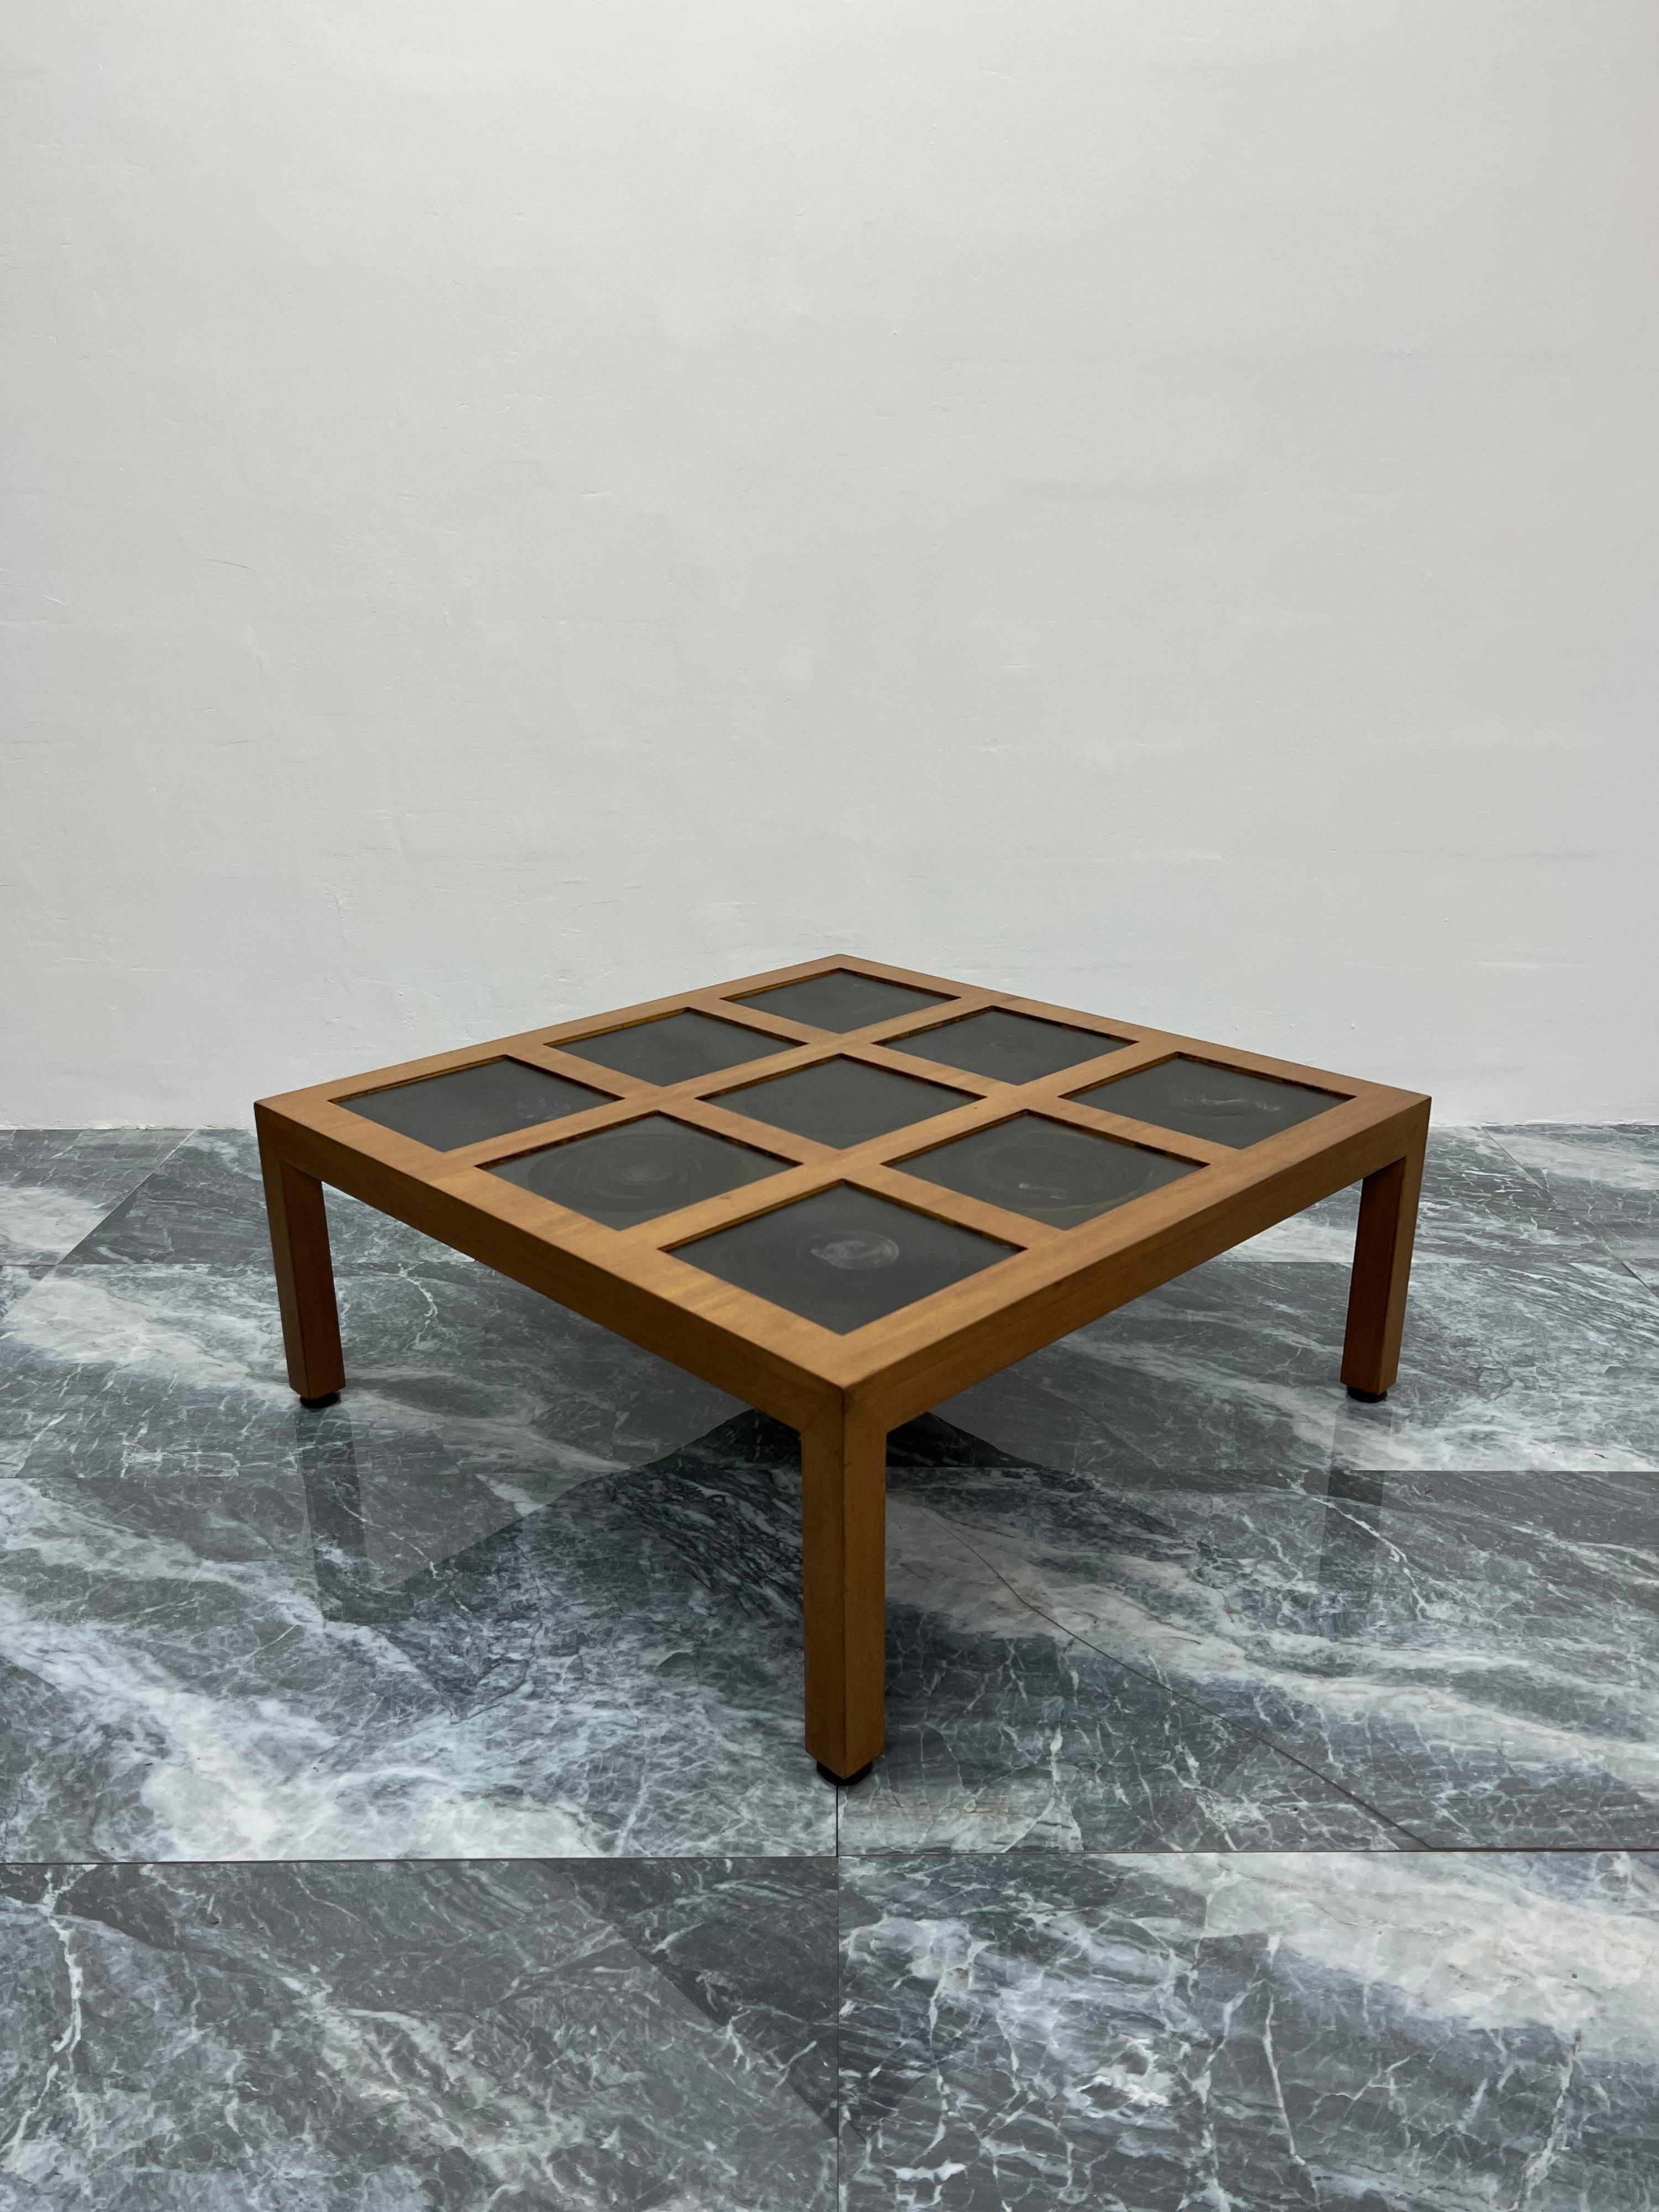 American Edward Wormley Sandalwood and Blackened Steel Coffee Table for Dunbar, 1950s For Sale